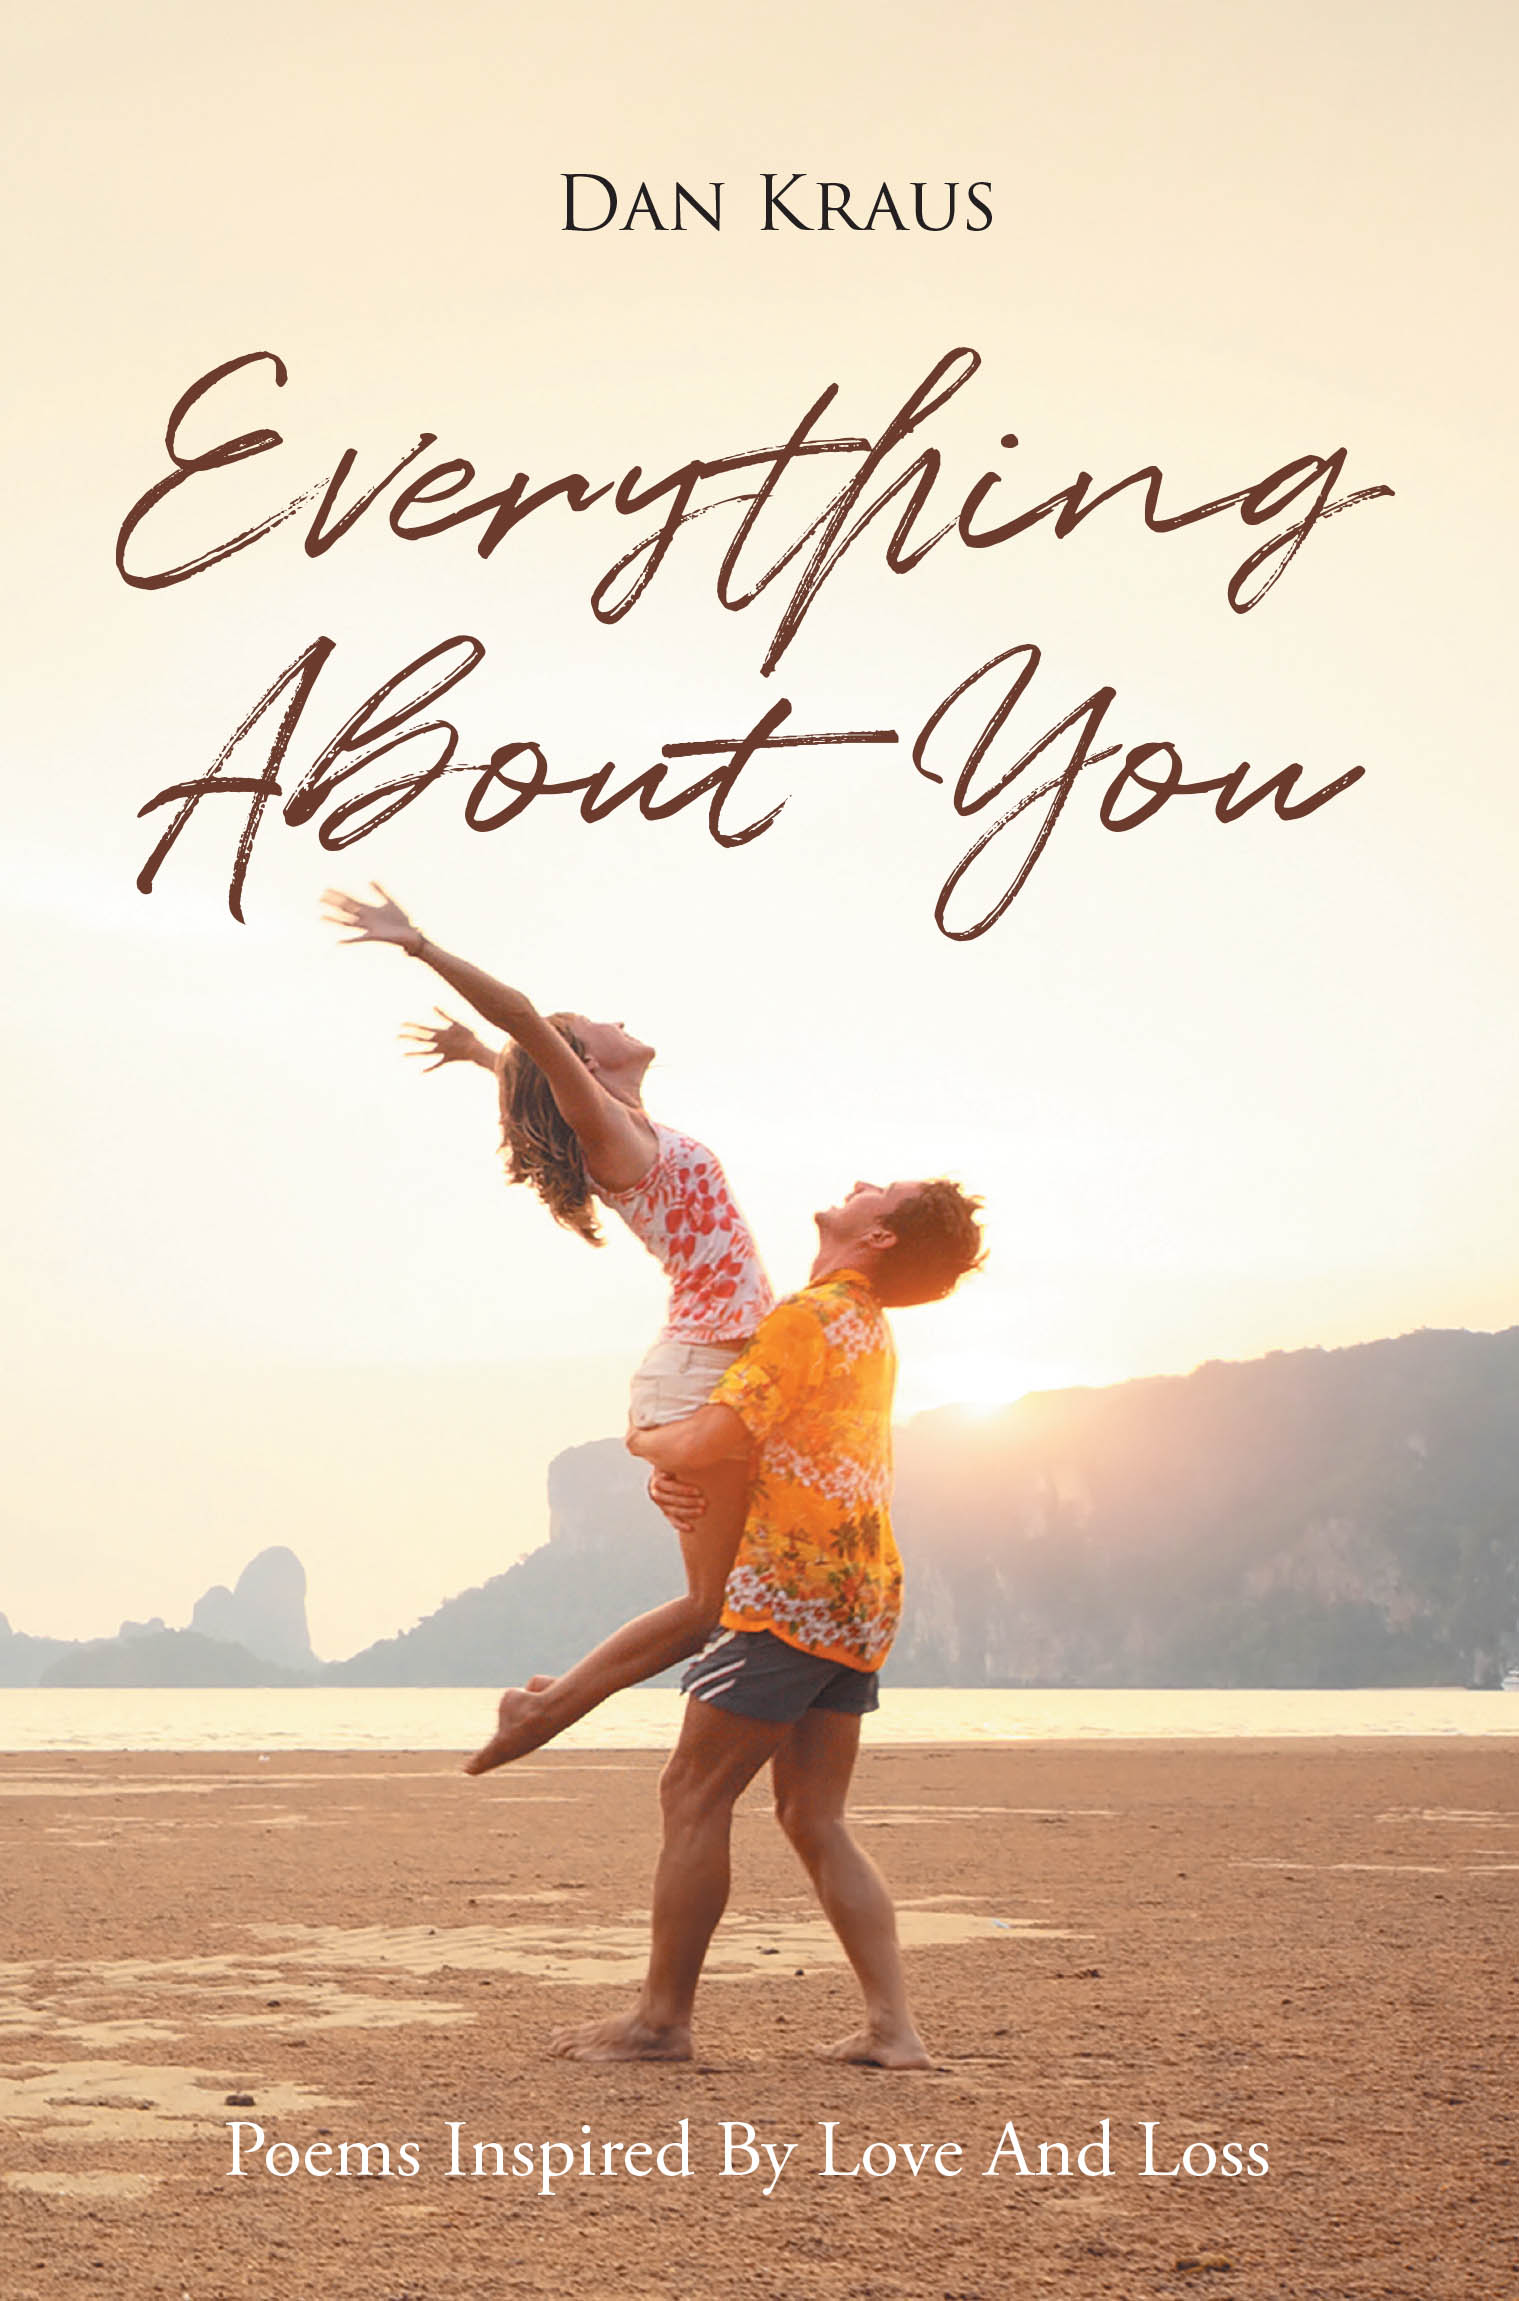 Author Dan Kraus’s New Book, “Everything About You: Poems Inspired By Love And Loss,” is a Poignant Collection of Poetry That Expresses Grief and Loss